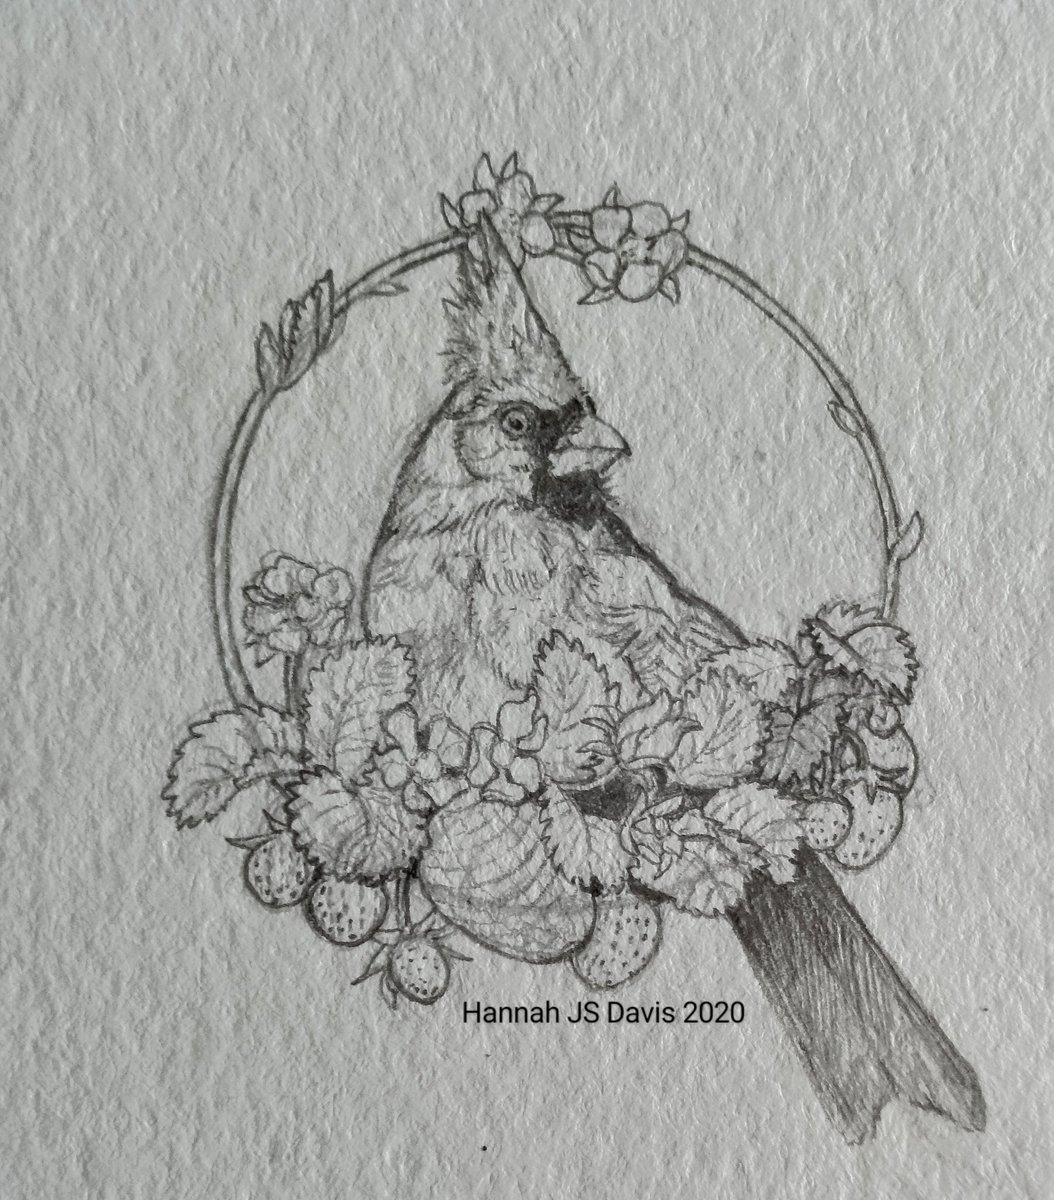 A TinyArt commission of a cardinal with strawberries. These are just the pencils, it will be painted.

#commission #tinyart #workinprogress #wip #pencil #illustration #cardinalbird #strawberry #birds #smallart #art #flowers